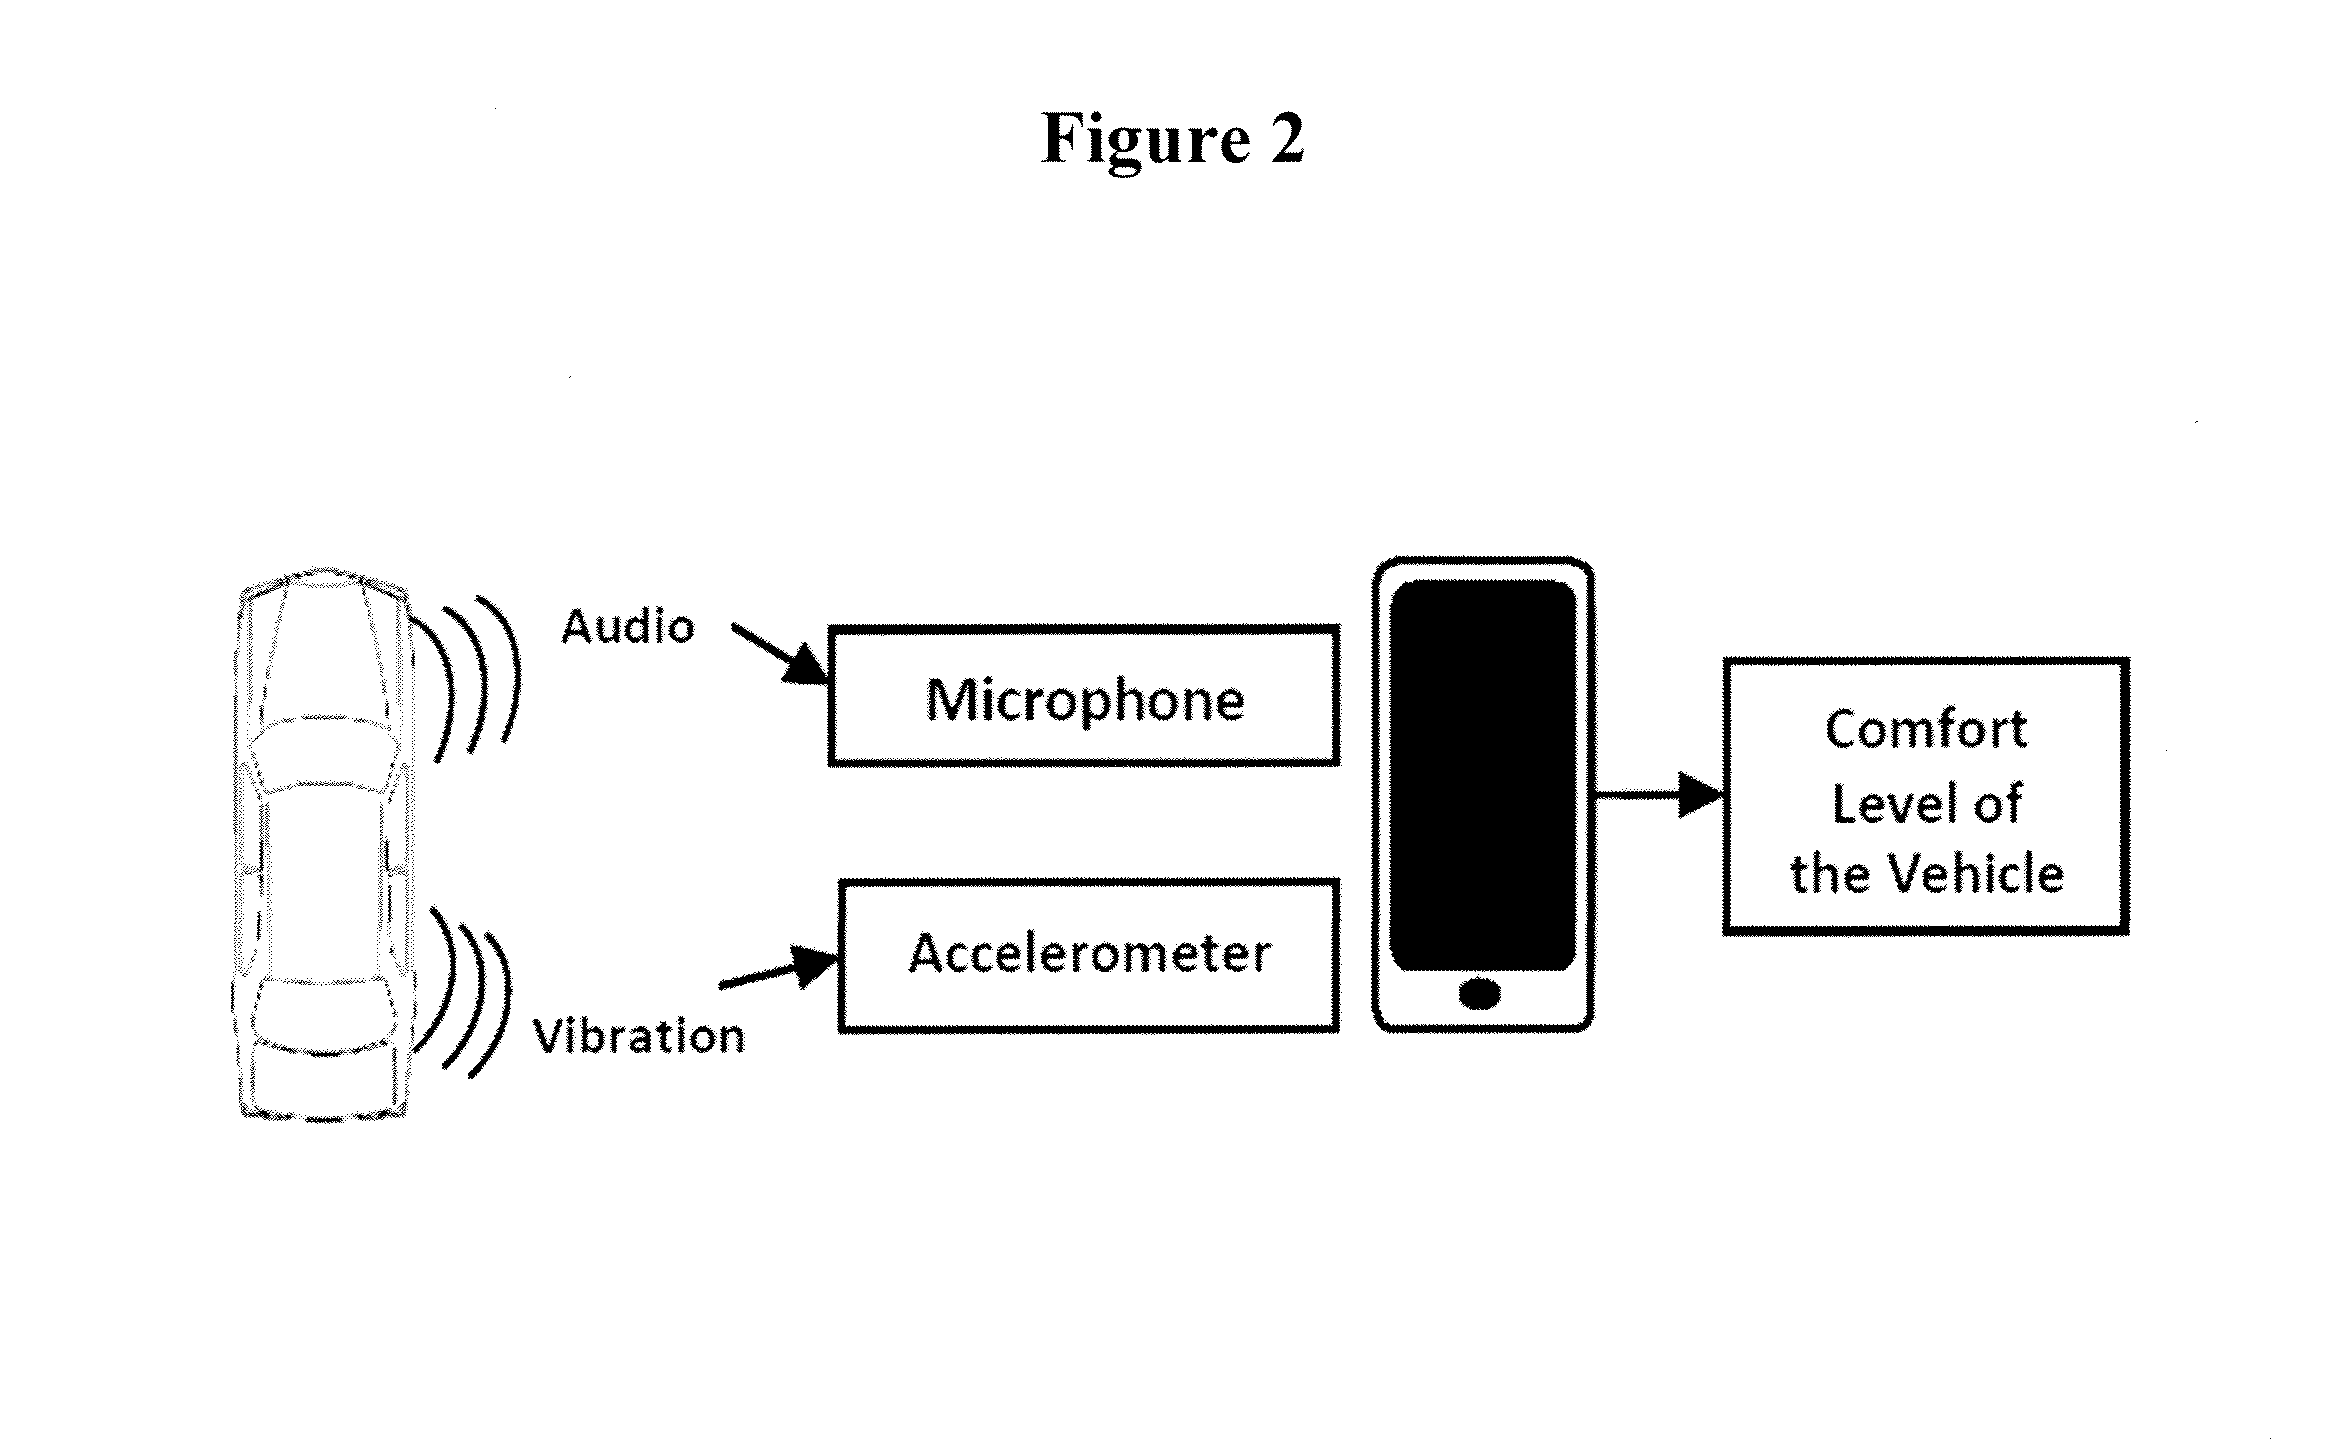 Methods for detection of driving conditions and habits